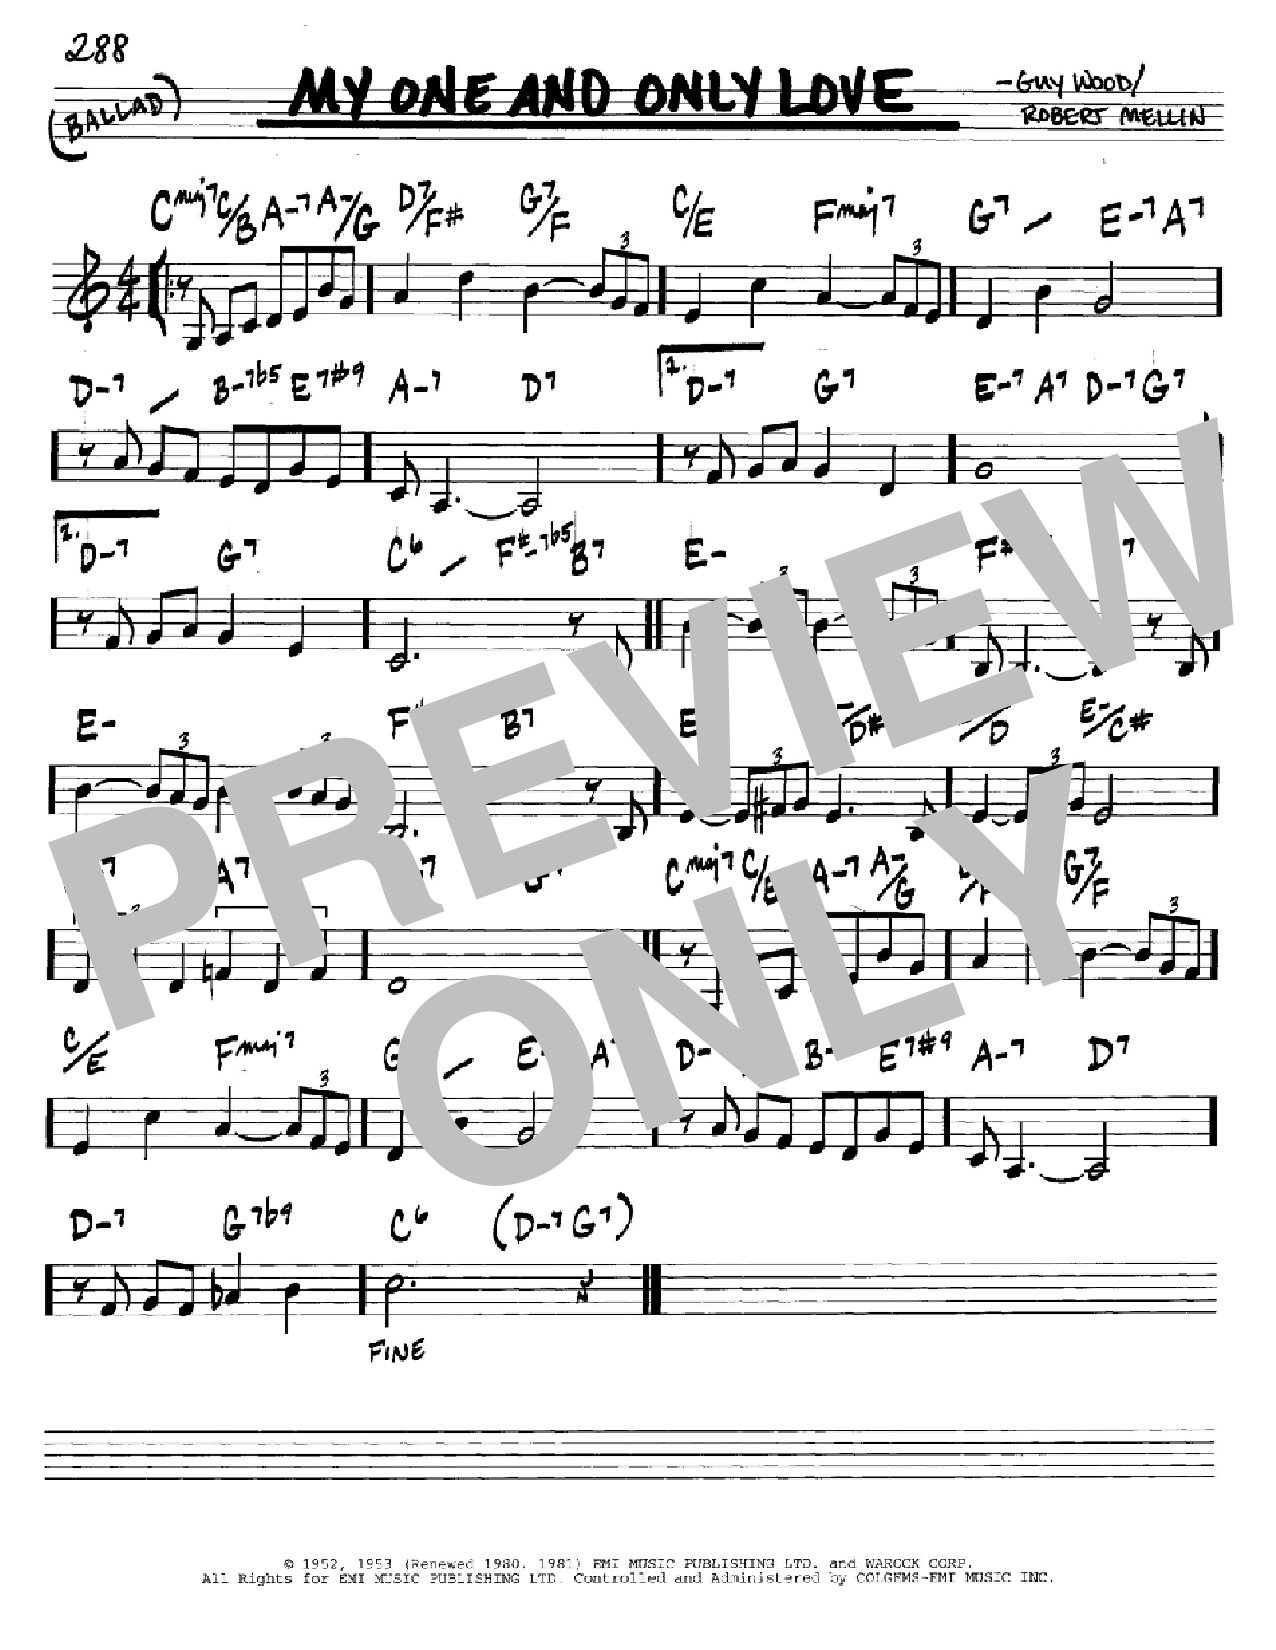 Download Robert Mellin My One And Only Love Sheet Music